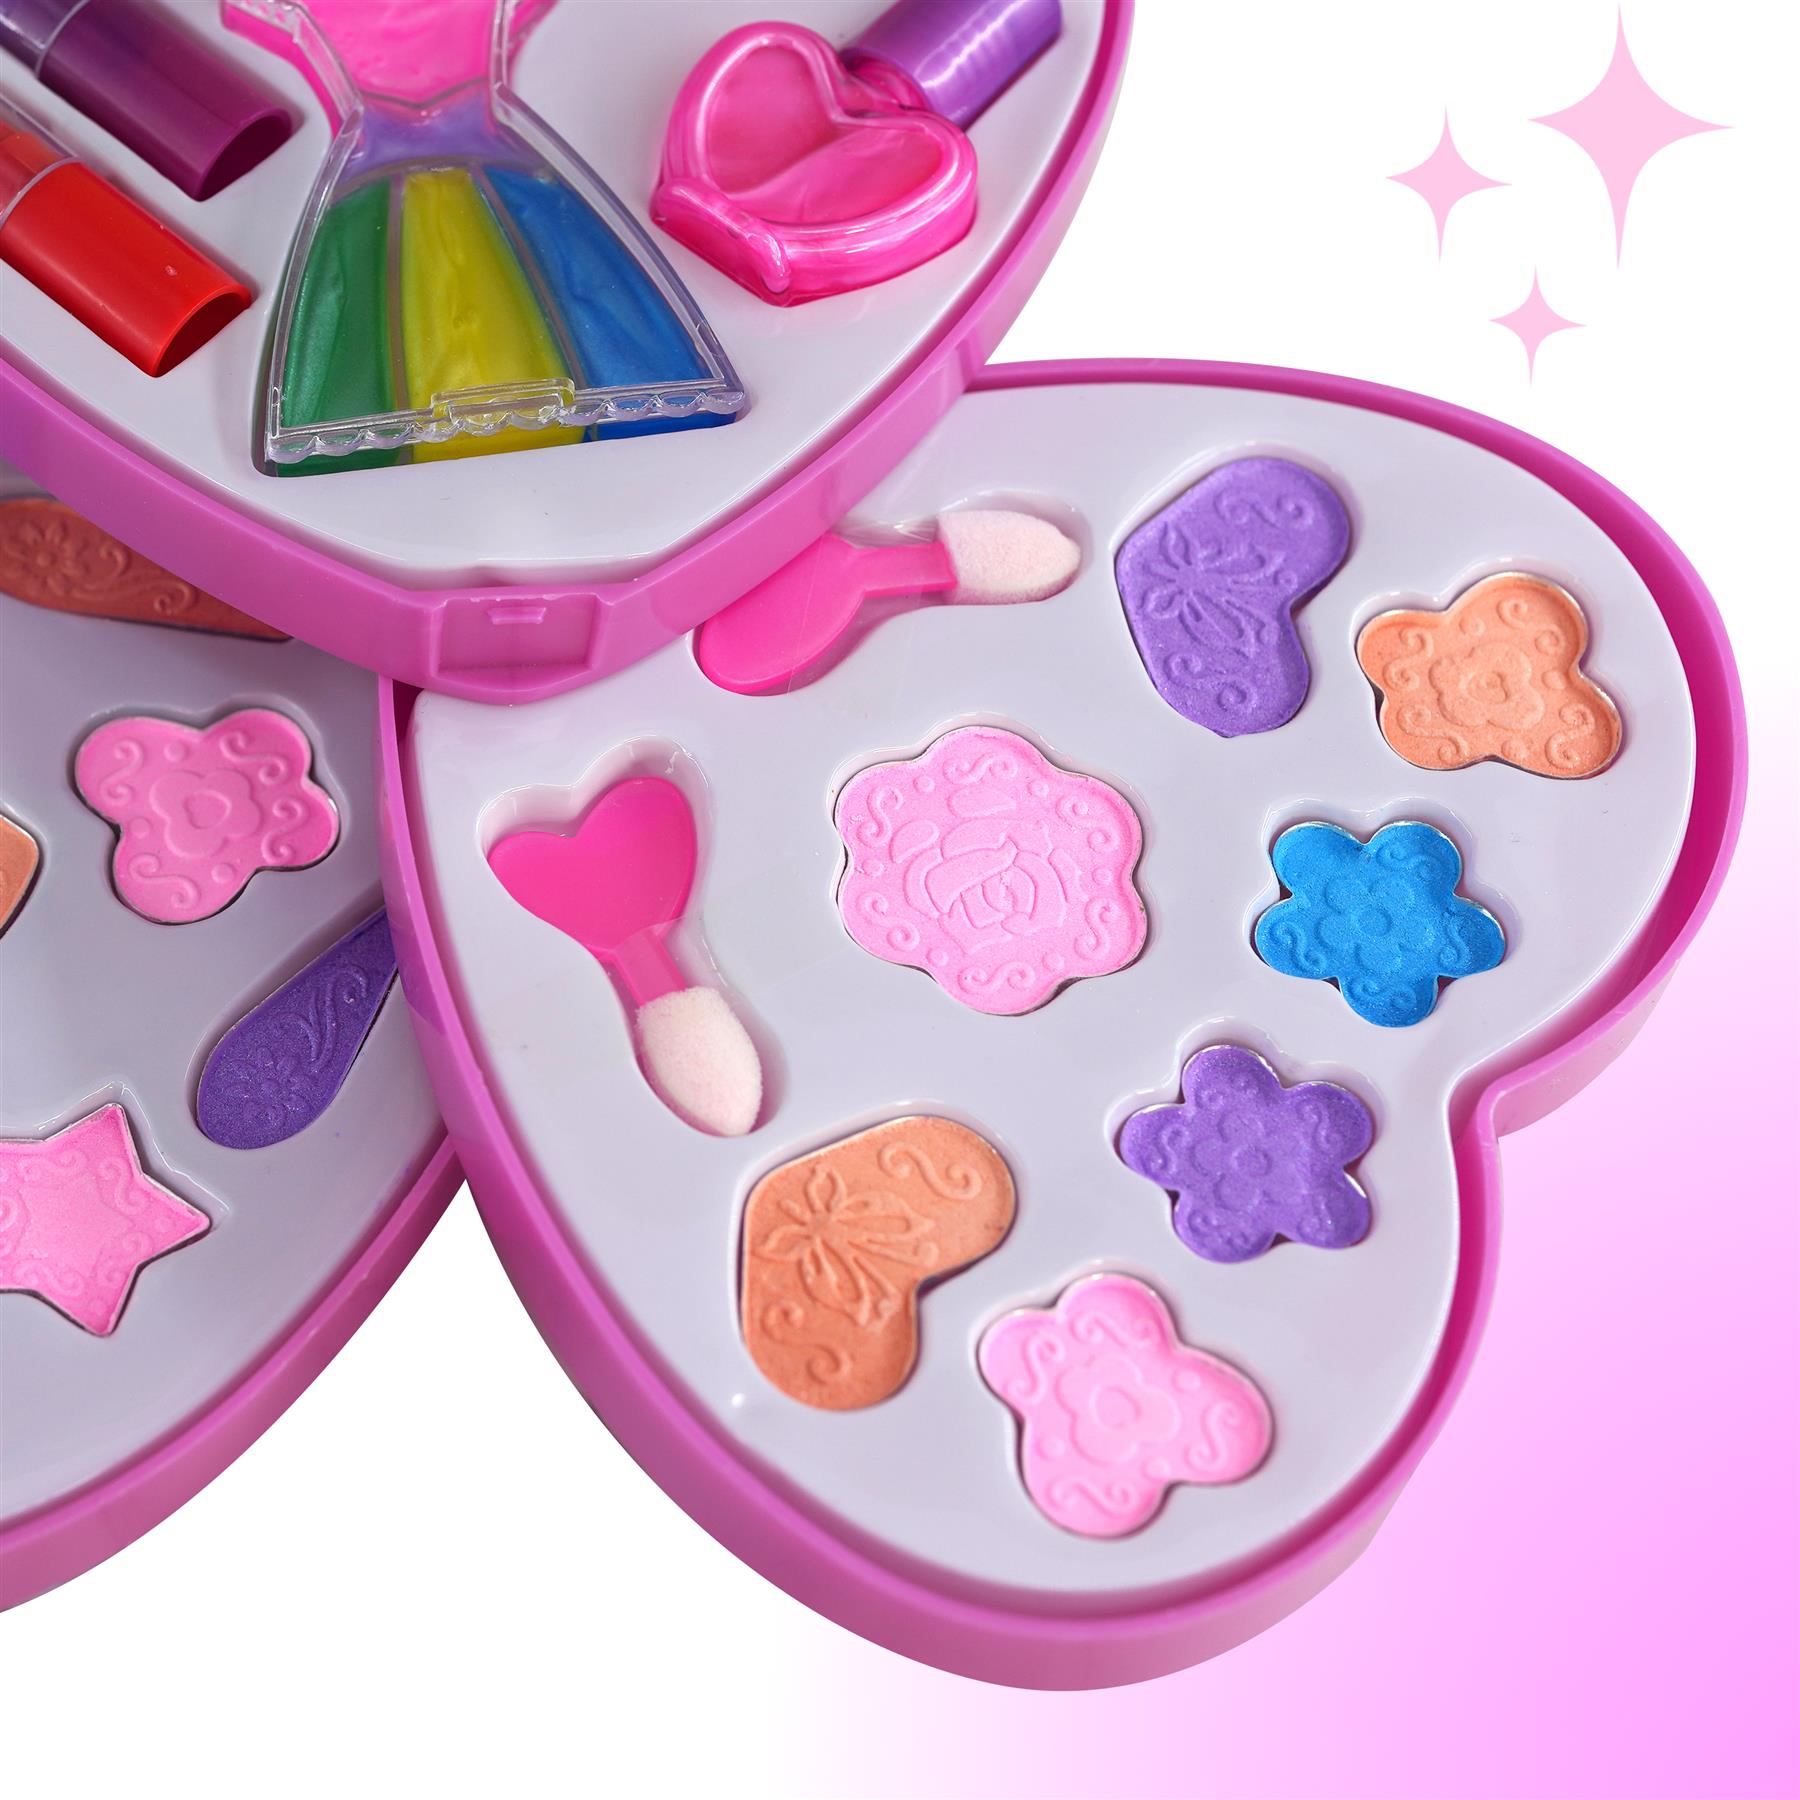 3 Tier Girls Make Up Play Set With Mirror by The Magic Toy Shop - The Magic Toy Shop